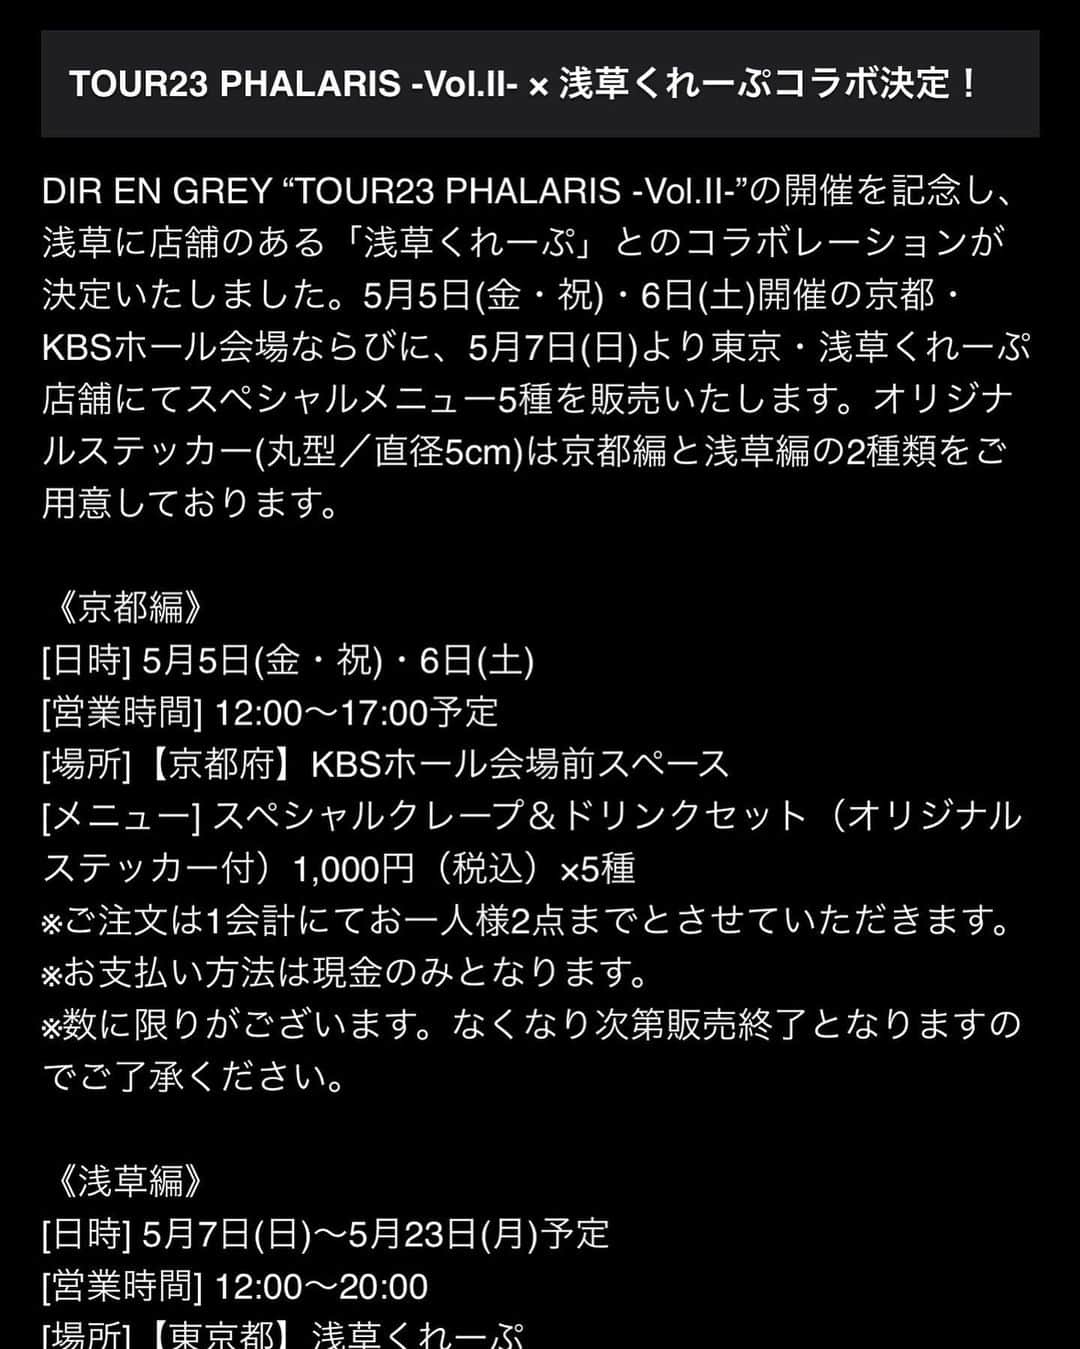 DIR EN GREYさんのインスタグラム写真 - (DIR EN GREYInstagram)「. ［🇯🇵 JP 🇯🇵］［🇬🇧 EN 🇺🇸］ TOUR23 PHALARIS -Vol.II- × 浅草くれーぷコラボ決定！  DIR EN GREY “TOUR23 PHALARIS -Vol.II-”の開催を記念し、浅草に店舗のある「浅草くれーぷ」とのコラボレーションが決定いたしました。5月5日(金・祝)・6日(土)開催の京都・KBSホール会場ならびに、5月7日(日)より東京・浅草くれーぷ店舗にてスペシャルメニュー5種を販売いたします。オリジナルステッカー(丸型／直径5cm)は京都編と浅草編の2種類をご用意しております。  《京都編》 [日時] 5月5日(金・祝)・6日(土) [営業時間] 12:00～17:00予定 [場所]【京都府】KBSホール会場前スペース [メニュー] スペシャルクレープ＆ドリンクセット（オリジナルステッカー付）1,000円（税込）×5種 ※ご注文は1会計にてお一人様2点までとさせていただきます。 ※お支払い方法は現金のみとなります。 ※数に限りがございます。なくなり次第販売終了となりますのでご了承ください。  《浅草編》 [日時] 5月7日(日)～5月23日(月)予定 [営業時間] 12:00～20:00 [場所]【東京都】浅草くれーぷ 〒111-0032 東京都台東区浅草１丁目41番9号 [Instagram] asakusa_crepe [メニュー] スペシャルクレープ（オリジナルステッカー付）900円(税込)×5種 ※お支払い方法は現金のみとなります。 ※数に限りがございます。なくなり次第販売終了となりますのでご了承ください。  ◤◢◤◢◤◢ ↓ 🇬🇧 EN 🇺🇸 ↓ ◤◢◤◢◤◢  TOUR23 PHALARIS -Vol.II- × ASAKUSA CREPES collaboration!  A collaboration with「ASAKUSA CREPES」consisting of a special menu of 5 crepes will be available at KBS Hall (Kyoto) on May 5th-6th as well as at the Tokyo store starting from May 7th To celebrate DIR EN GREY’s “TOUR23 PHALARIS -Vol.II-”.  《KYOTO》 [PERIOD] May 5th (Fri.) and 6th (Sat.) [BUSINESS HOURS] 12:00～17:00 *may vary [LOCATION]【Kyoto】KBS Hall (in front the venue) [MENU] Special Crepes & drink set (comes with original sticker) ￥1,000(tax in.) ×5 variations ※In one purchase, you may get up to 2 sets per person. ※Cash payment only ※Available in limited quantity. Until the stocks last.   《ASAKUSA》 [PERIOD] From May 7th (Mon.) to 23rd (Mon.) *may vary [BUSINESS HOURS] 12:00～20:00 [LOCATION]【Tokyo】ASAKUSA CREPES 〒111-0032 Tokyo Taito-ku, Asakusa 1-41-9 [Instagram] asakusa_crepe [MENU] Special Crepes (comes with original sticker) ￥900(tax in.) ×5 variations ※Cash payment only ※Available in limited quantity. Until the stocks last.」5月2日 19時19分 - direngrey_official